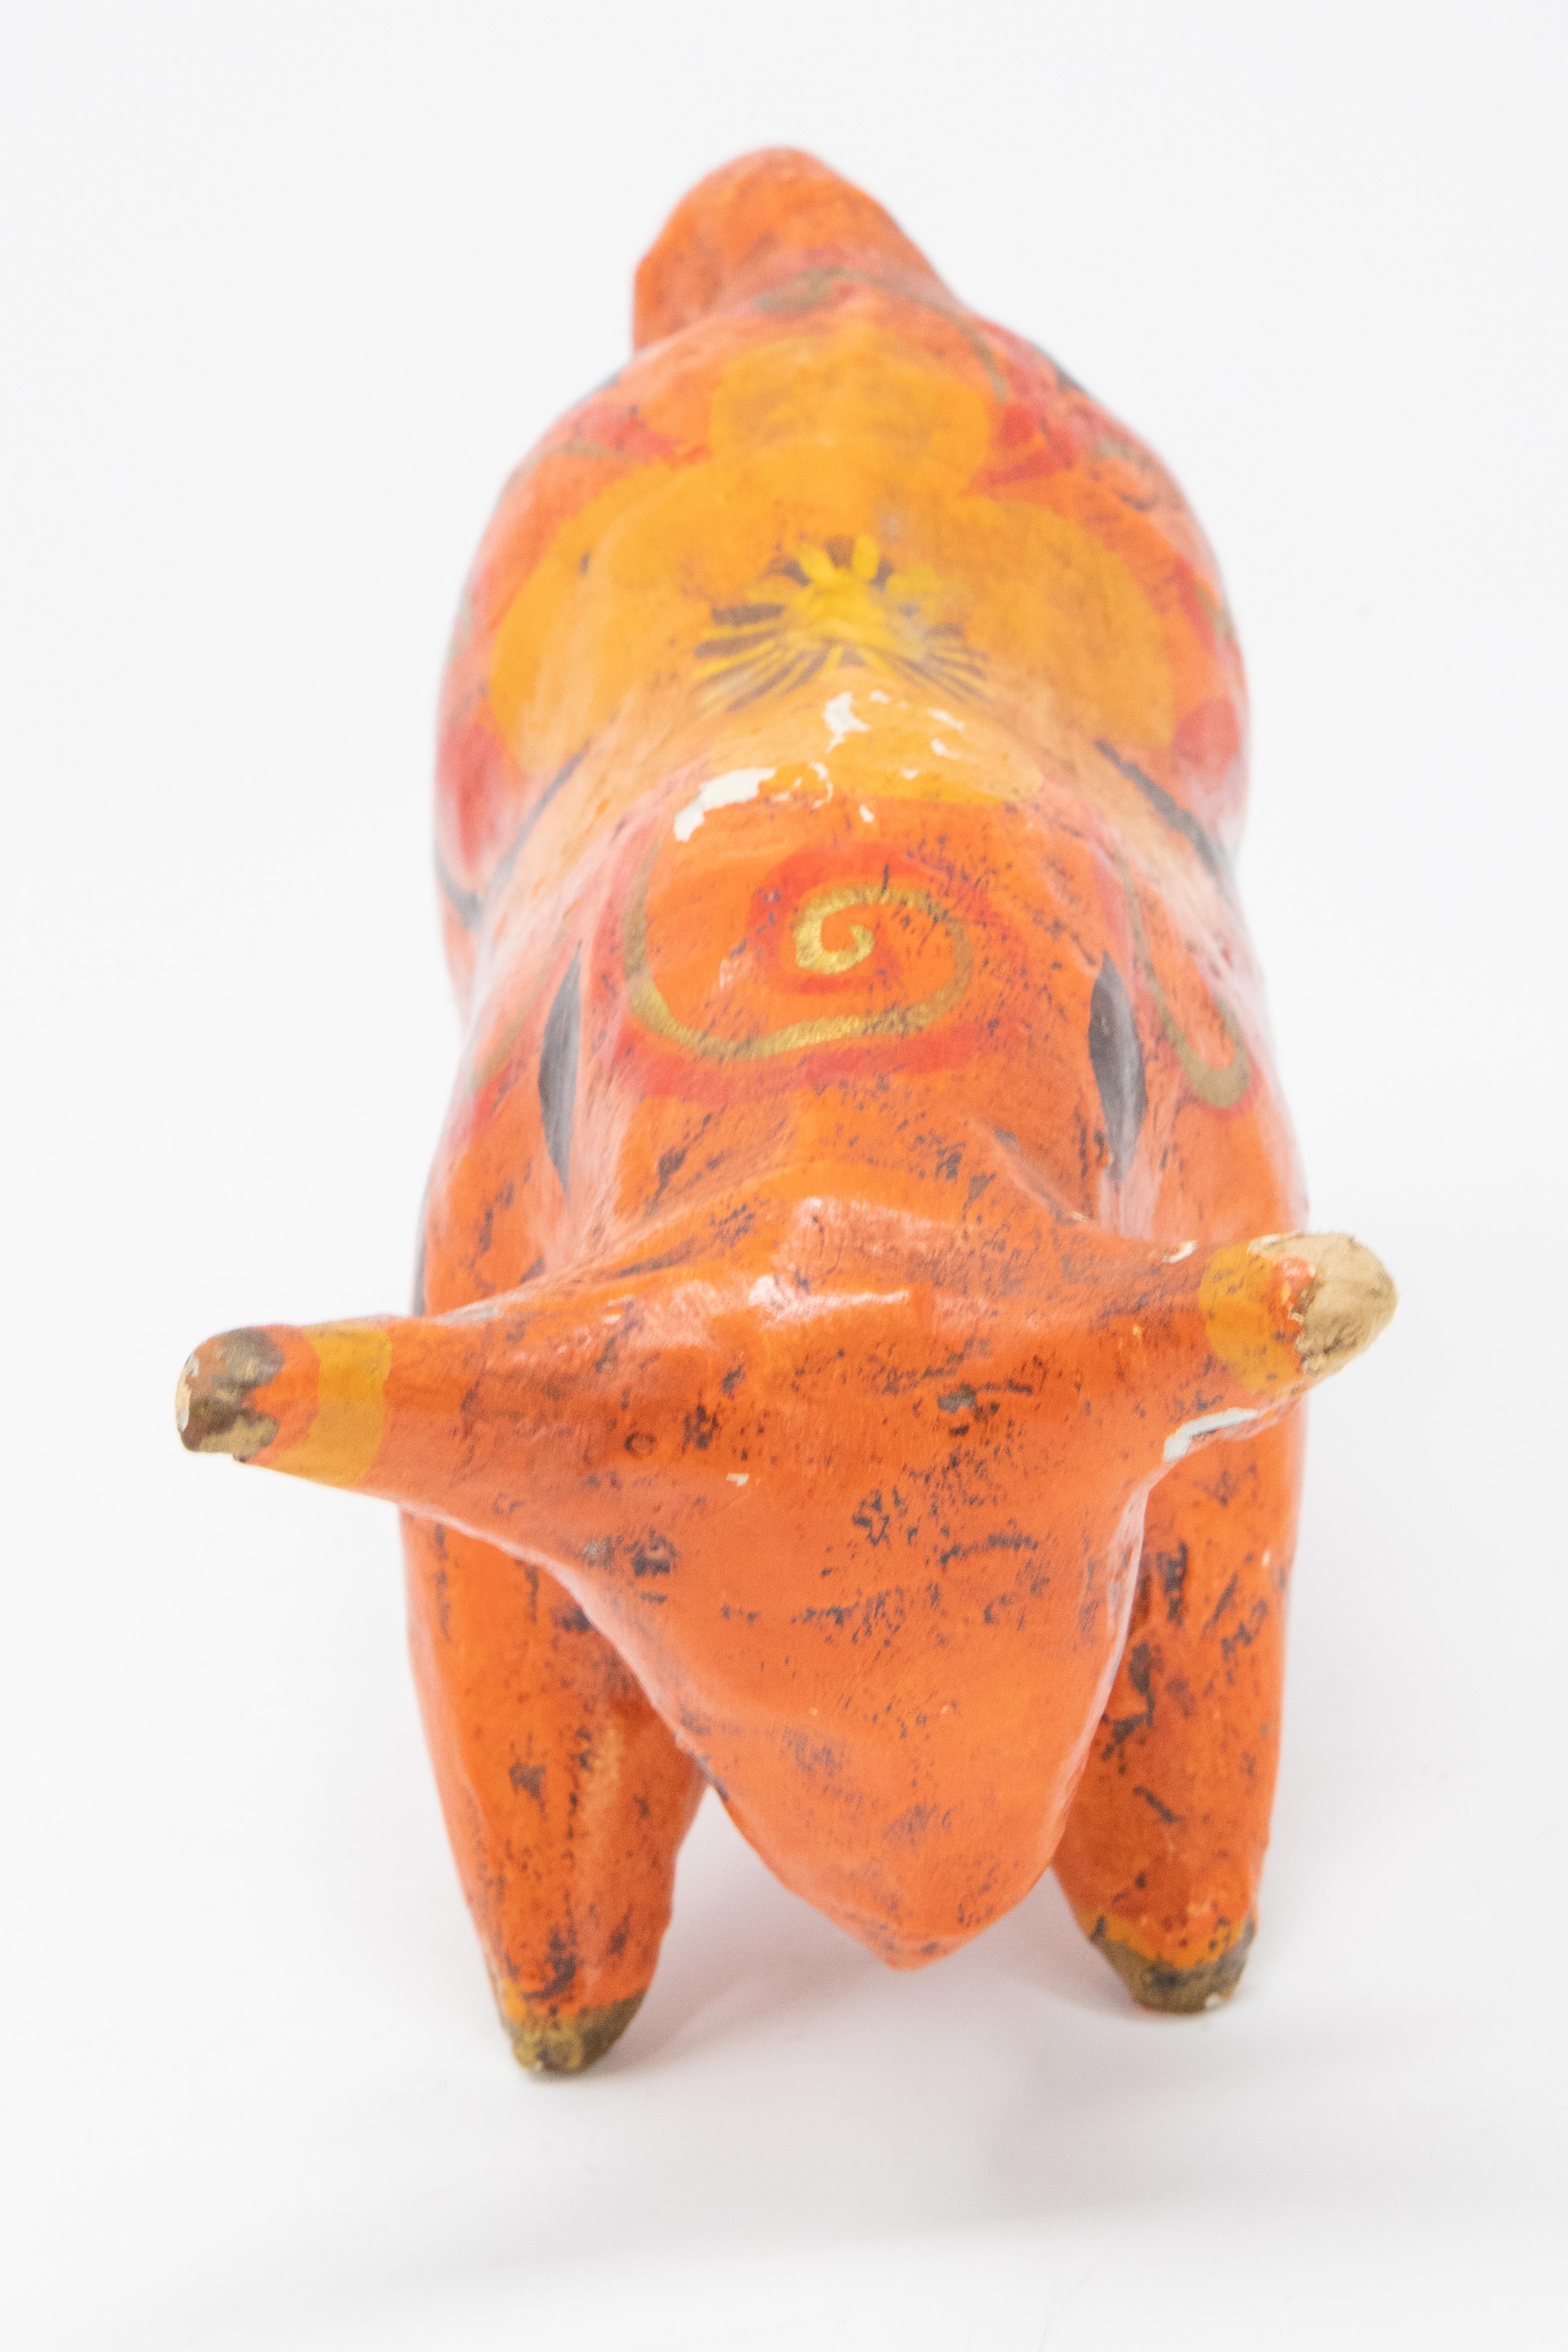 Featured is a Mexican bull figurine. This figurine has been painted a vibrant orange color with a black and yellow floral design on its back. This piece is marked “MEX” on the underside of the figurine. It is made of papier mâché.